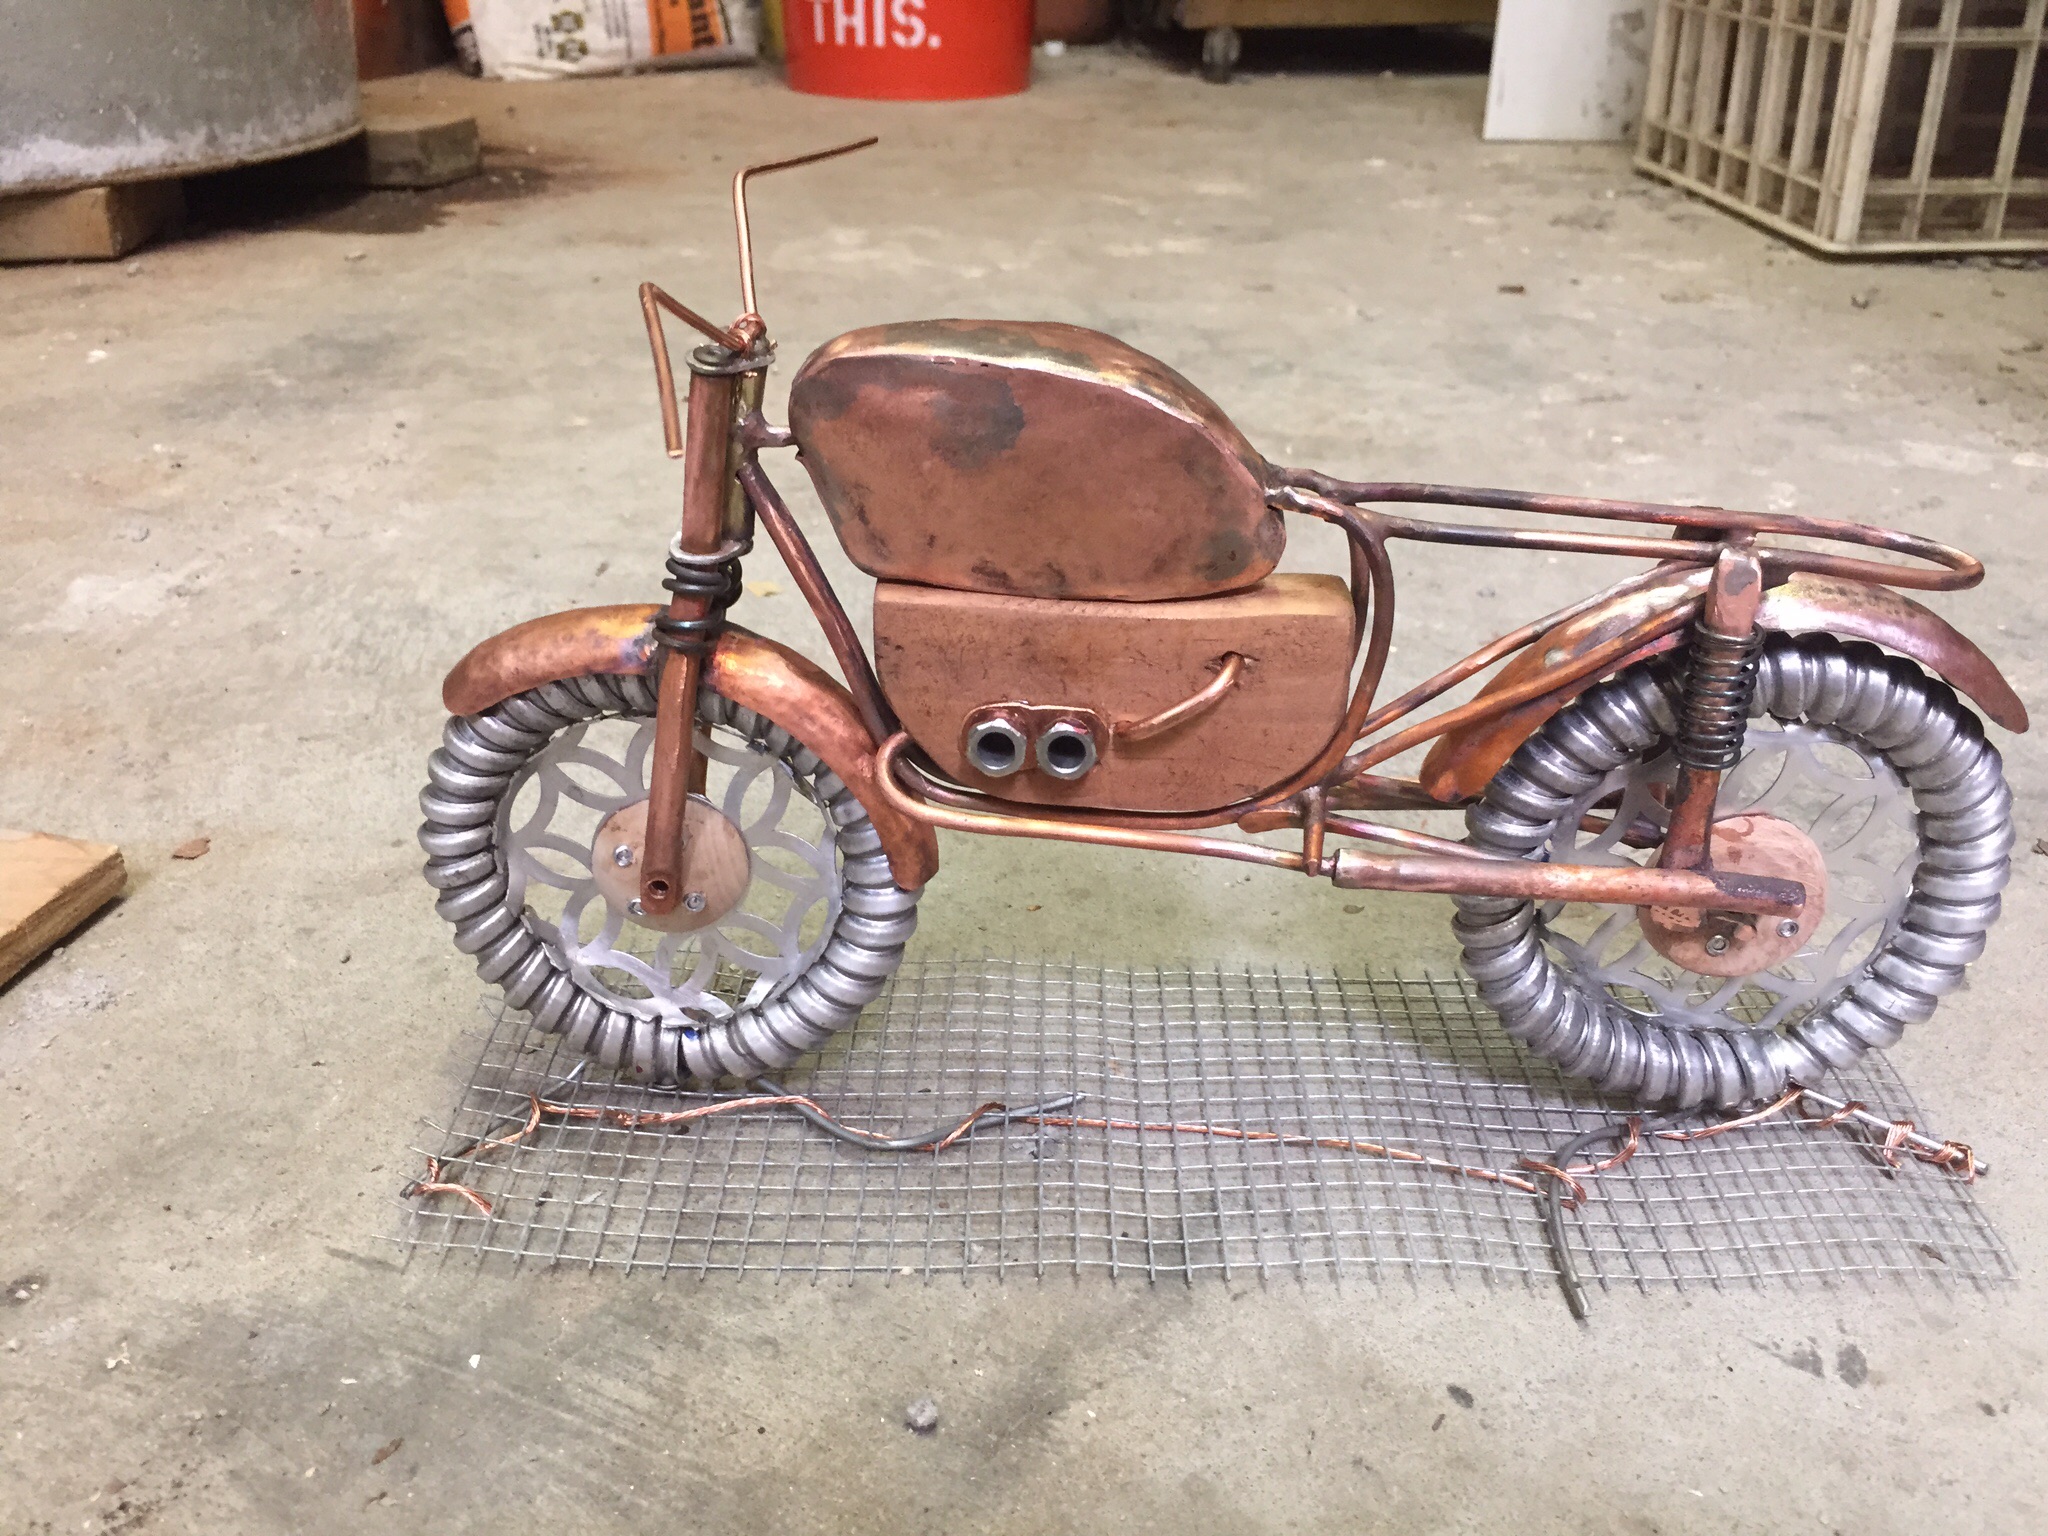 Art doll motorcycle ready to get a concrete base